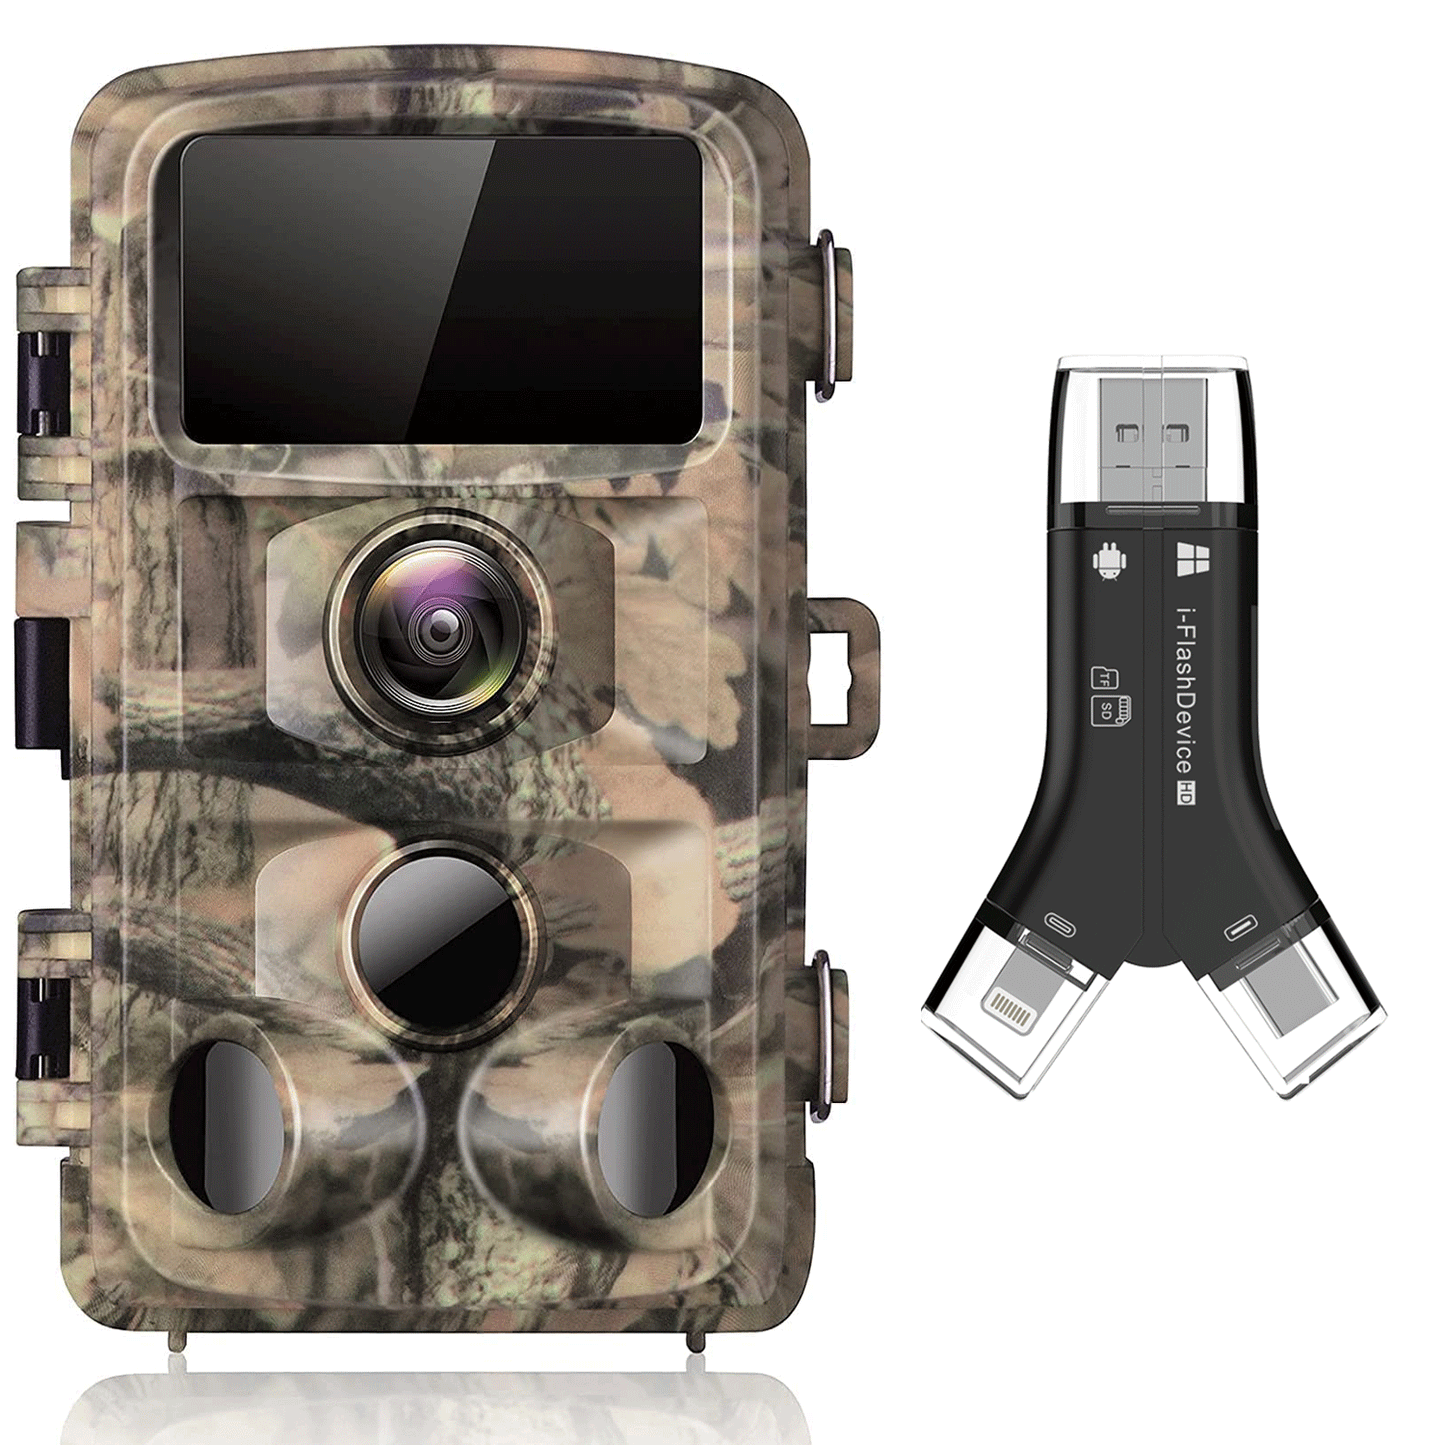 CAMPARK Trail Camera with Memory SD Card Reader 20MP 1080P Game Camera Viewer Deer Hunting with 3 Infrared Sensors Motion Activated Night Vision Waterproof for Wildlife Monitoring